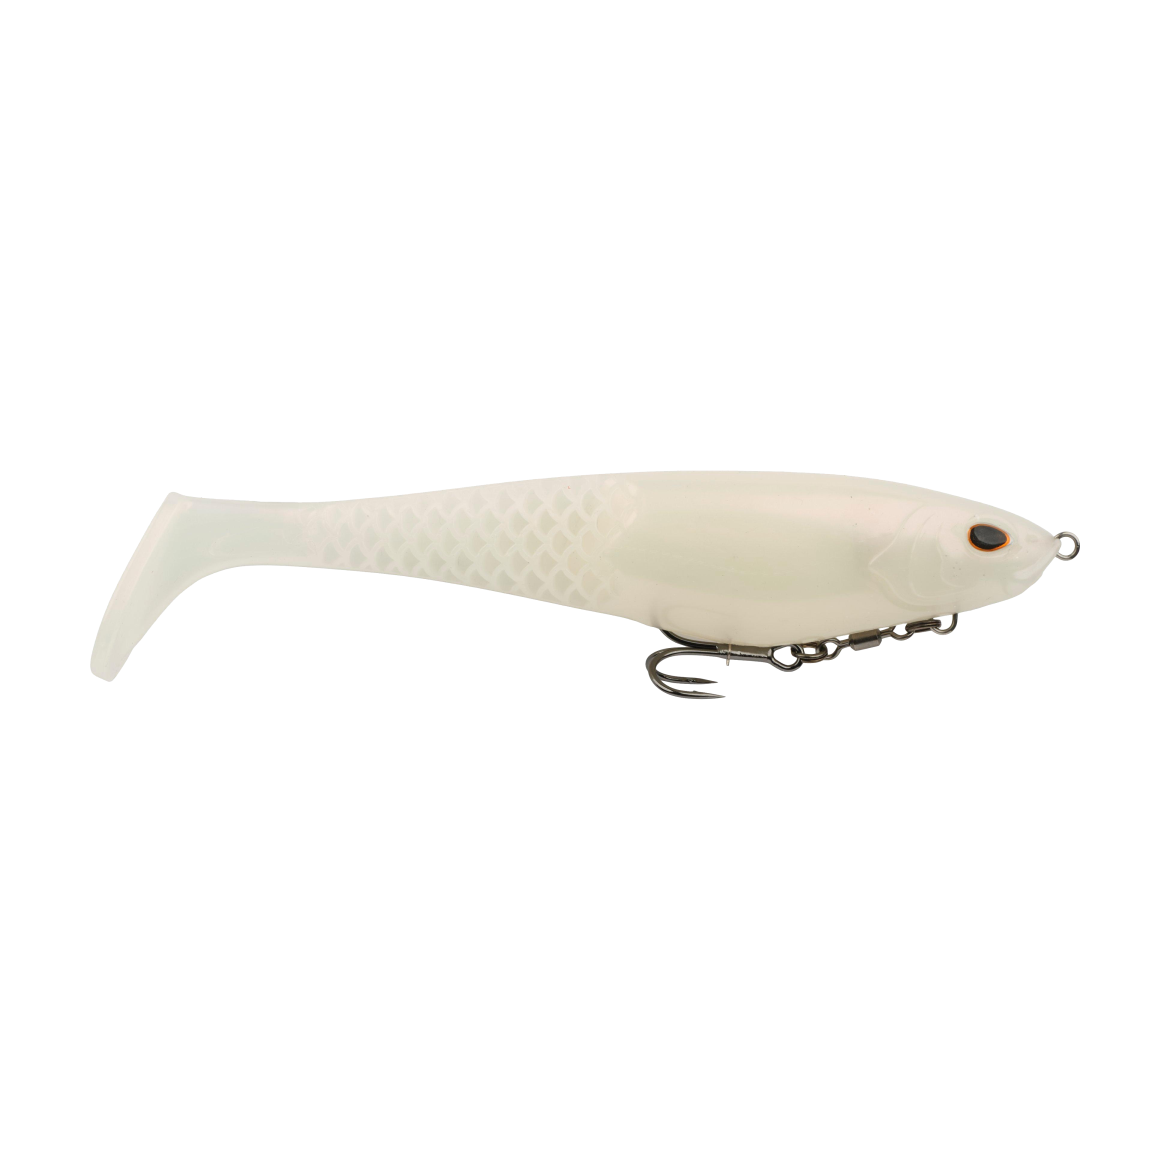 Chasebaits Prop Duster Glider Swimbait Lure